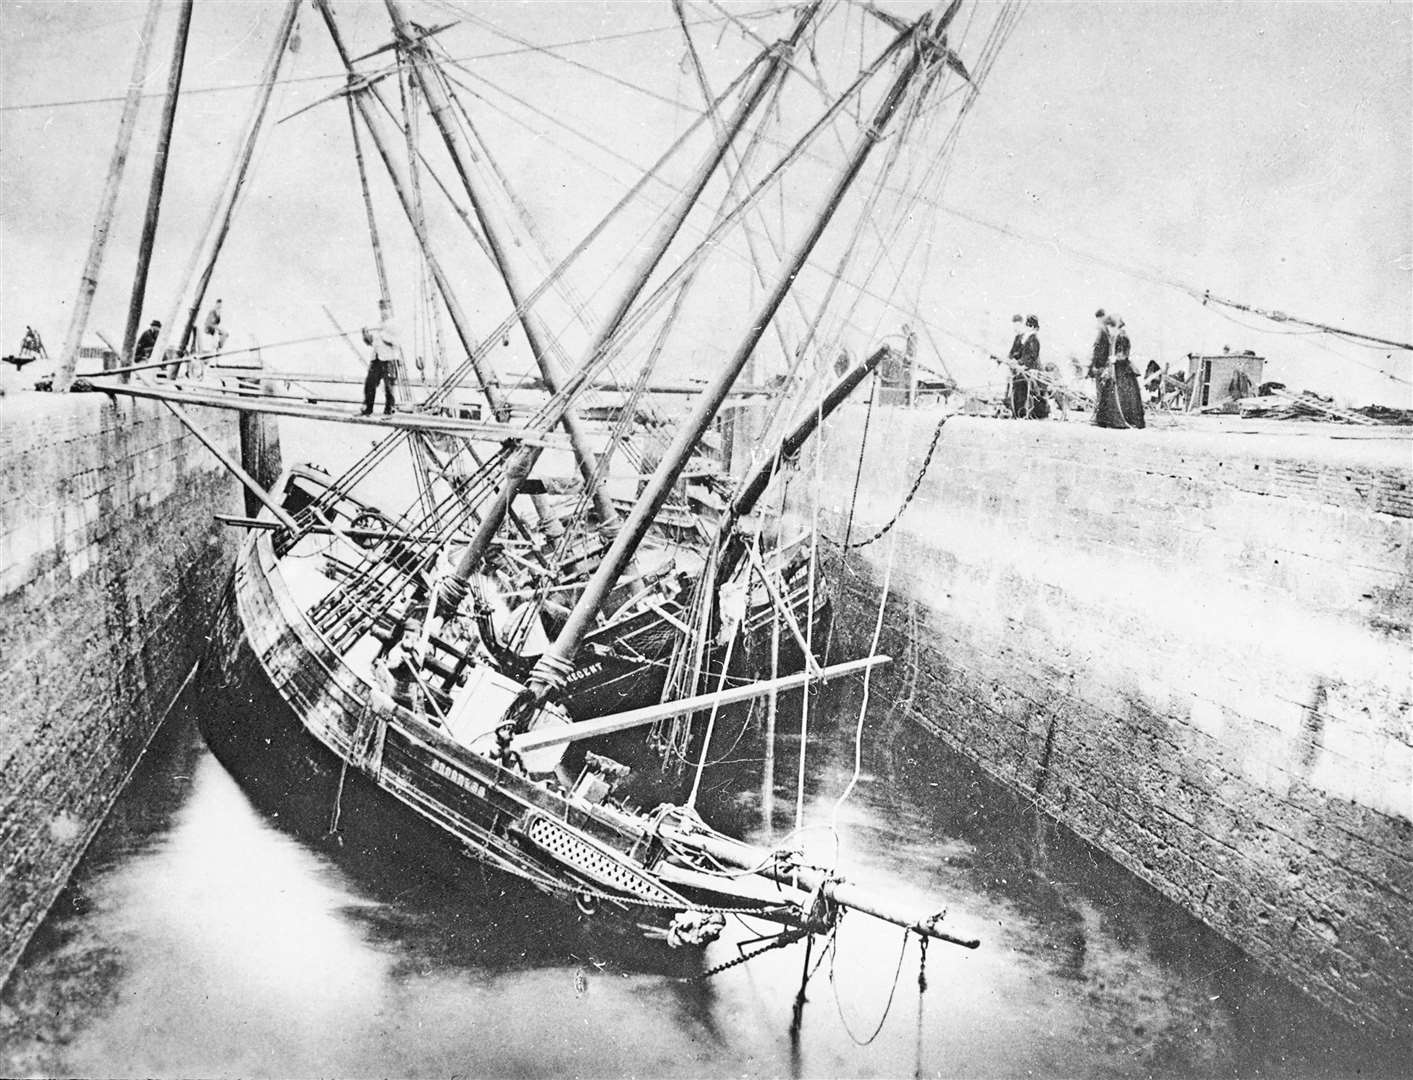 Two schooners blocking the Caledonian Canal at Clachnaharry on April 2, 1881. What's left of the boats can be seen in the mud flats at low tide close to the canal entrance. Picture courtesy of Inverness Museum and Art Gallery and www.ambaile.org.uk